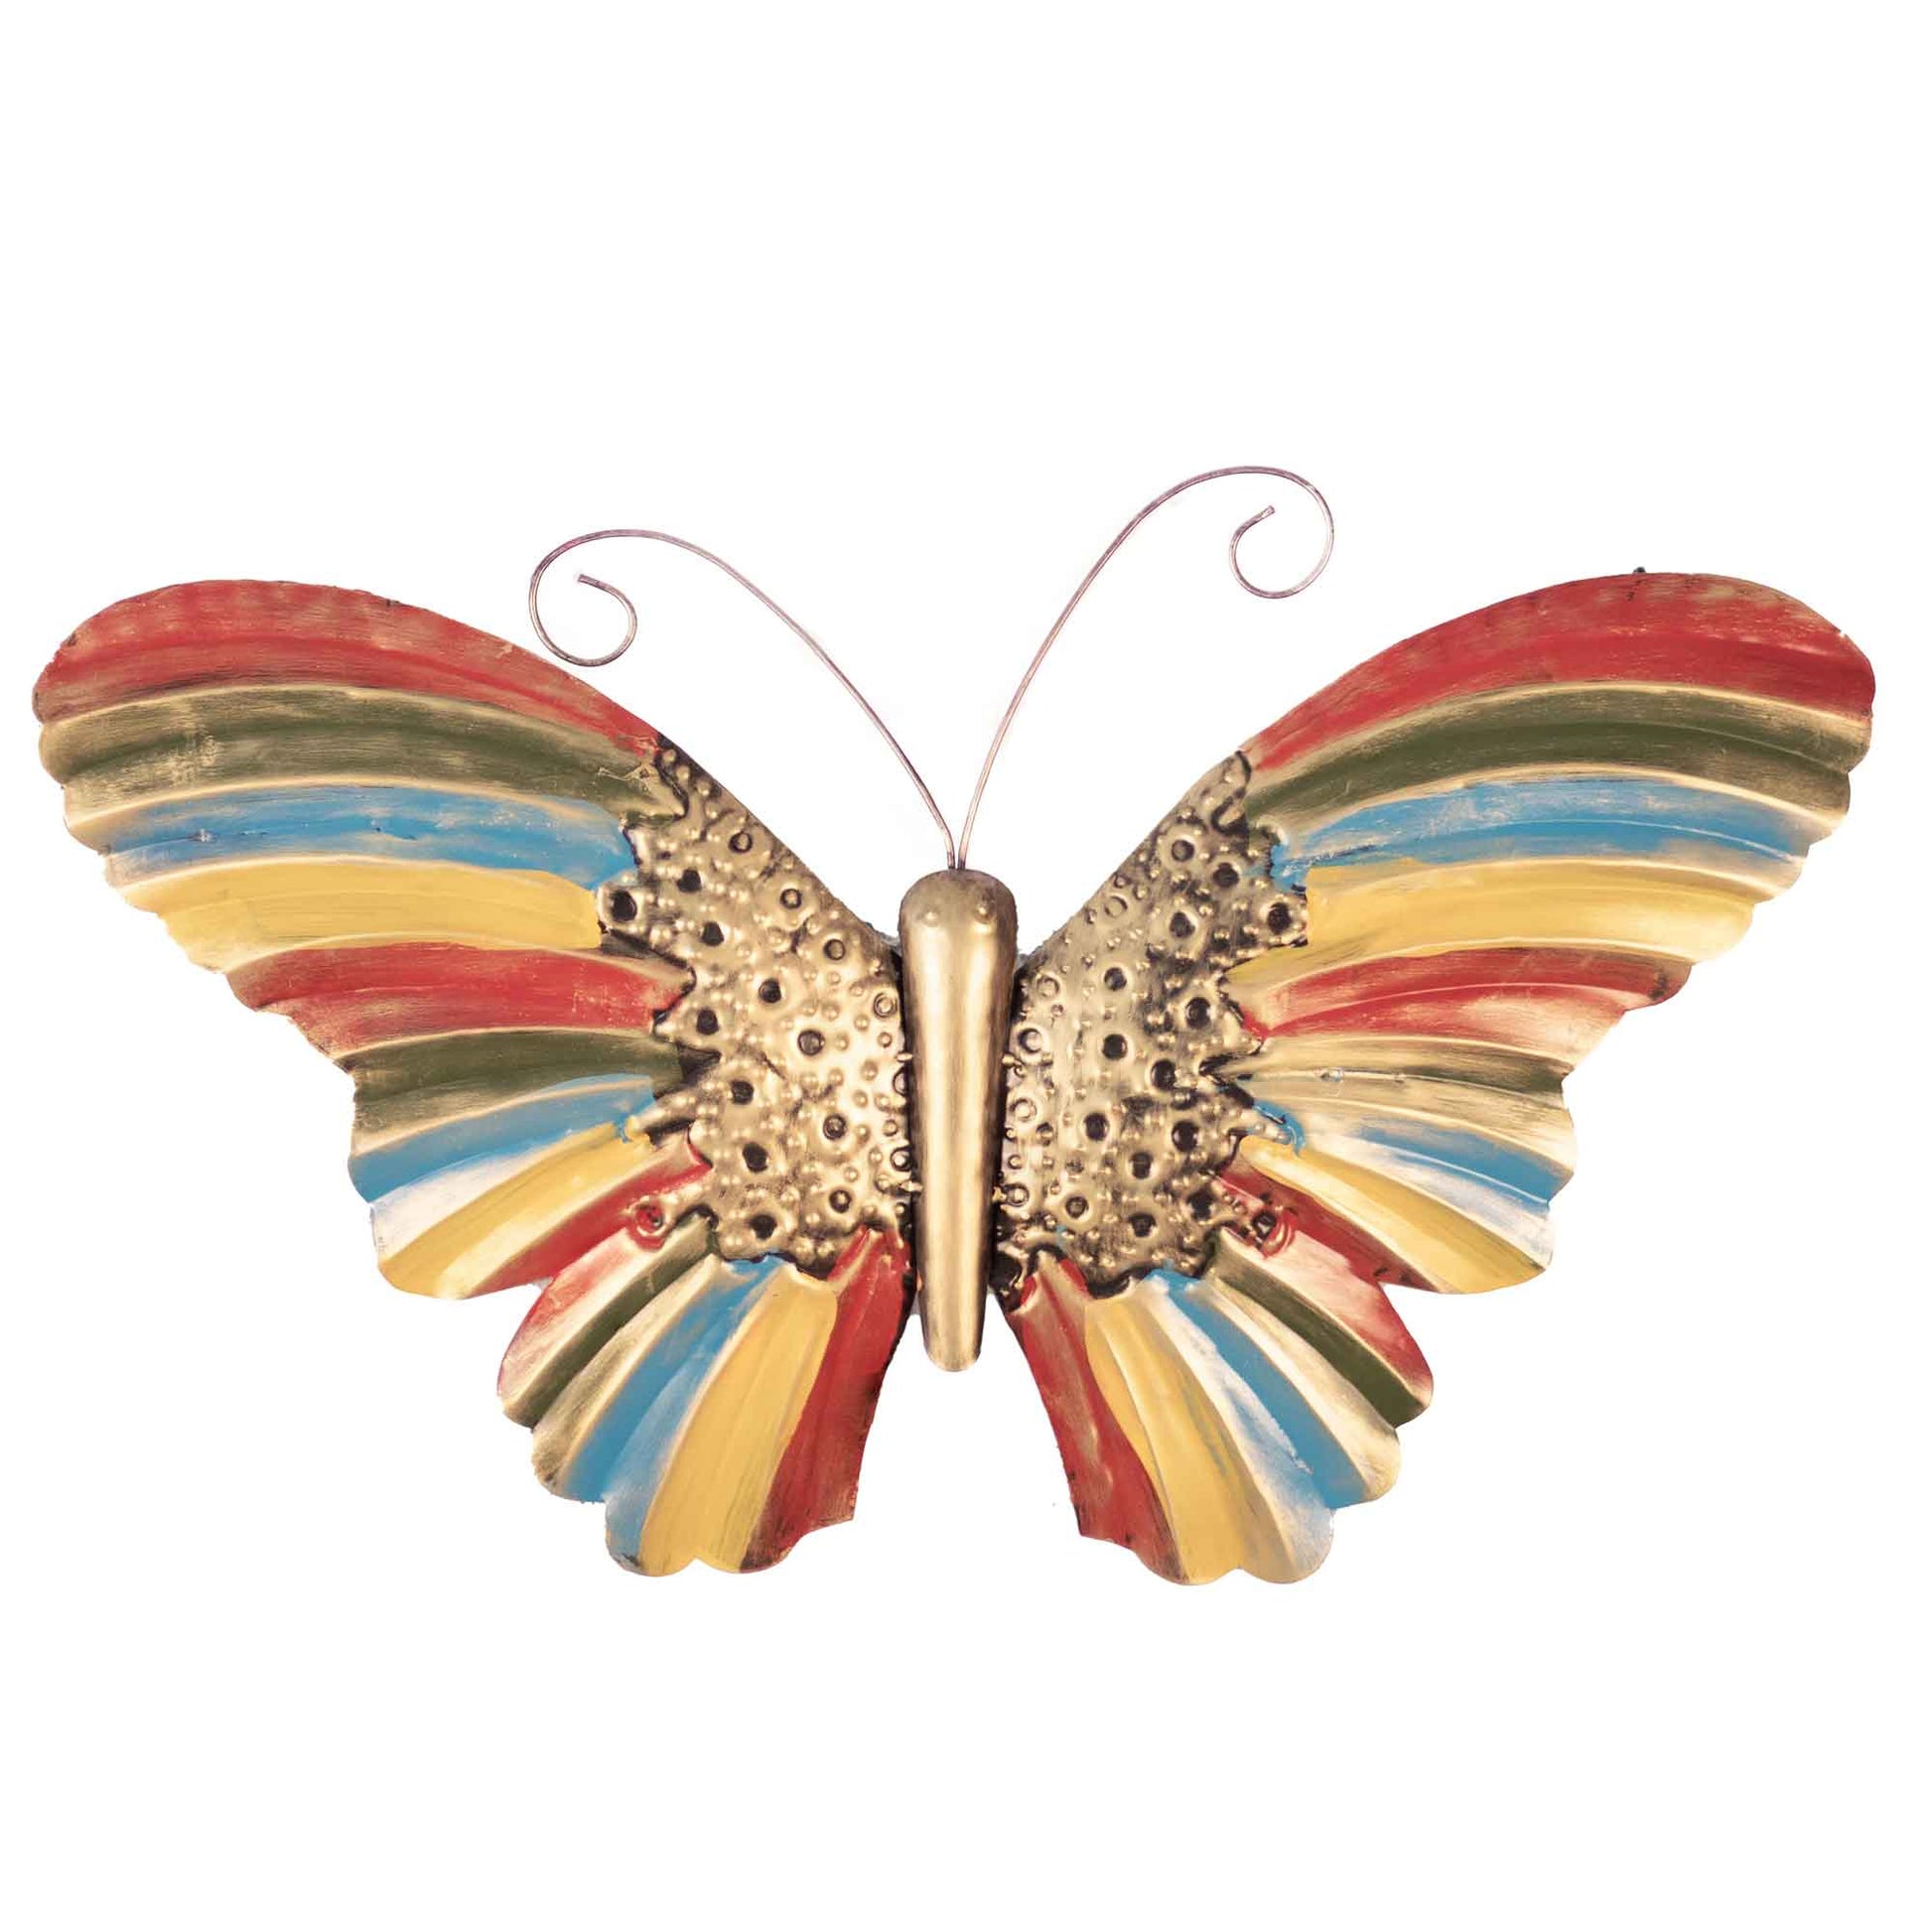 Kezevel Metal Butterfly Wall Decor - Metal Wall Art Multicolour Metal Wall Hangings for Living Room, Foyer and Home Decor